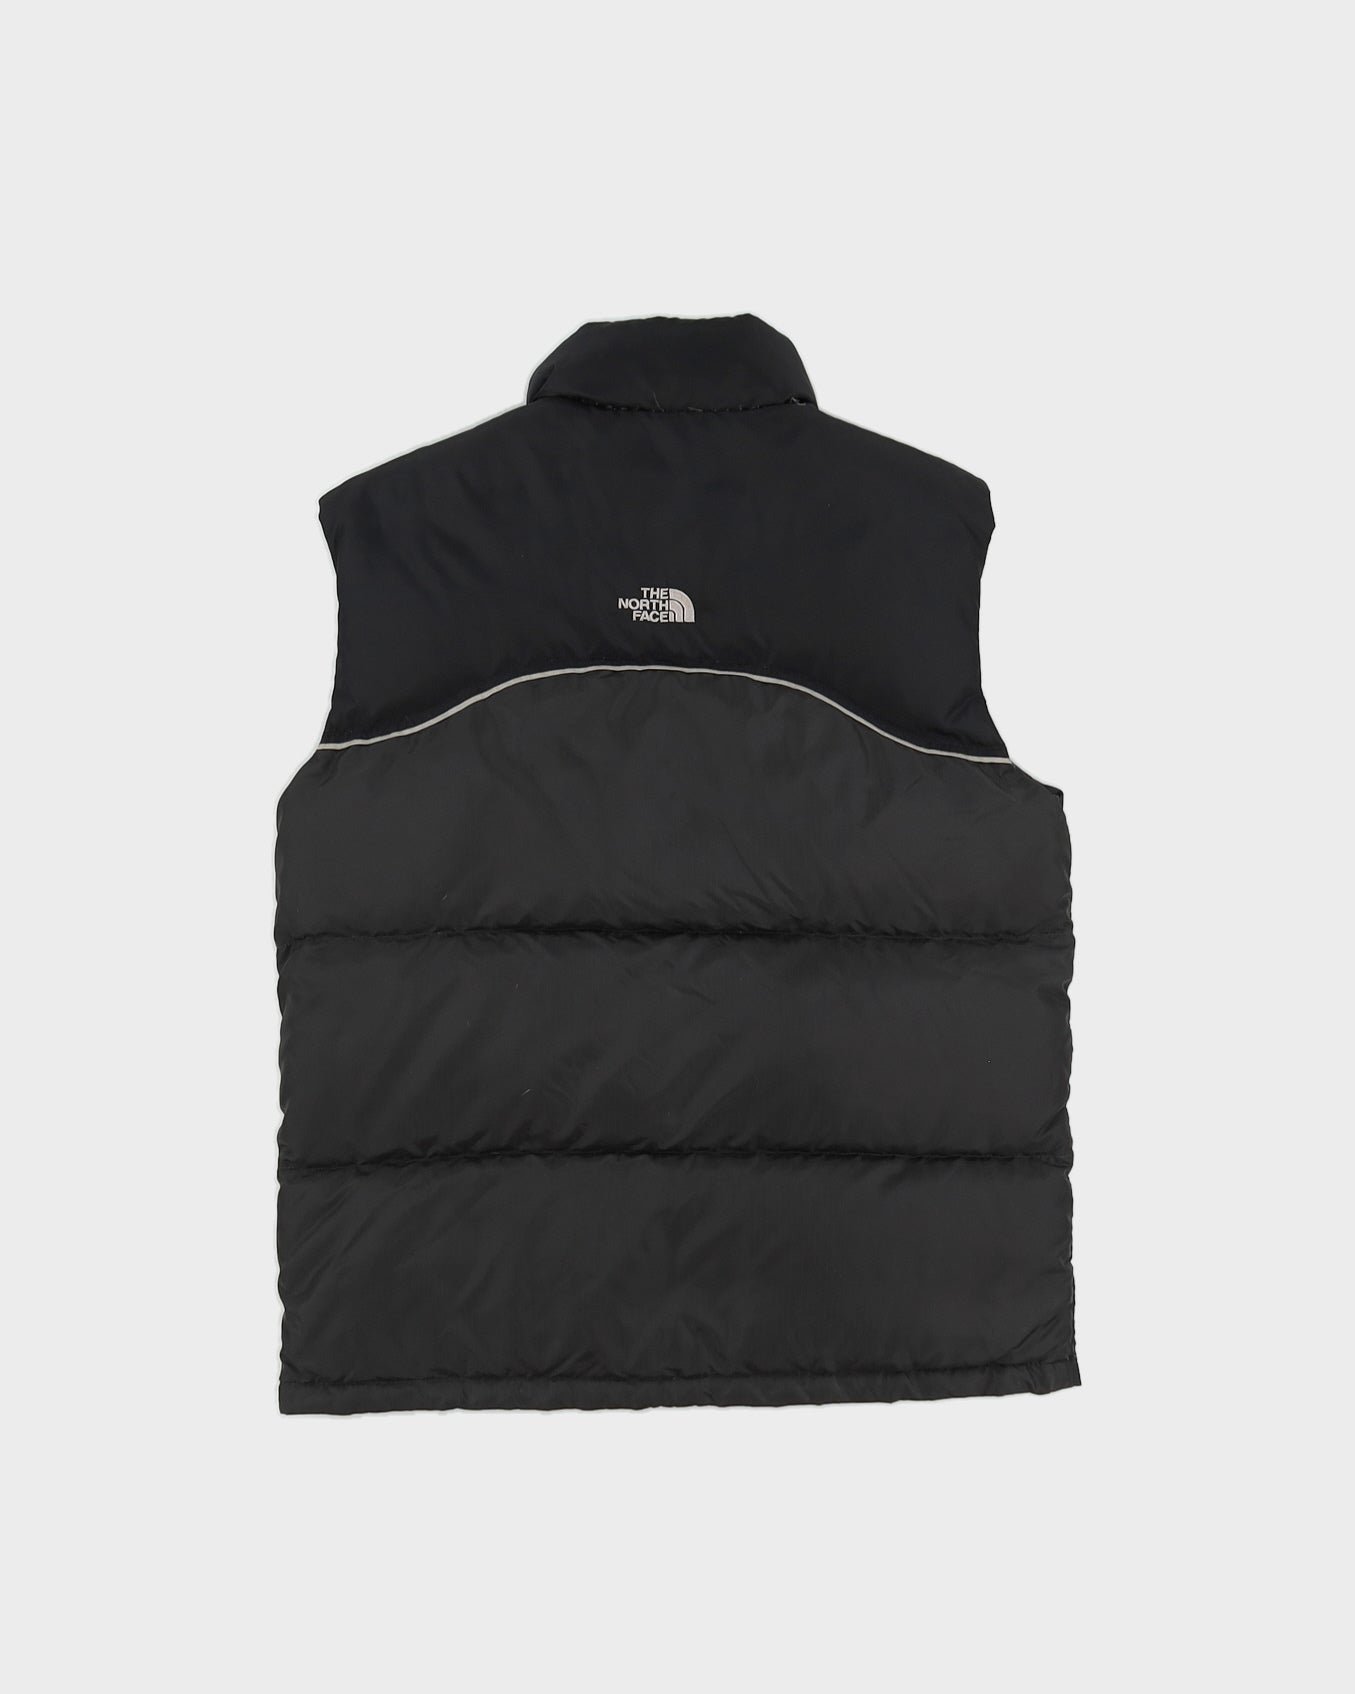 The North Face 600 Puffer Black Gilet - S